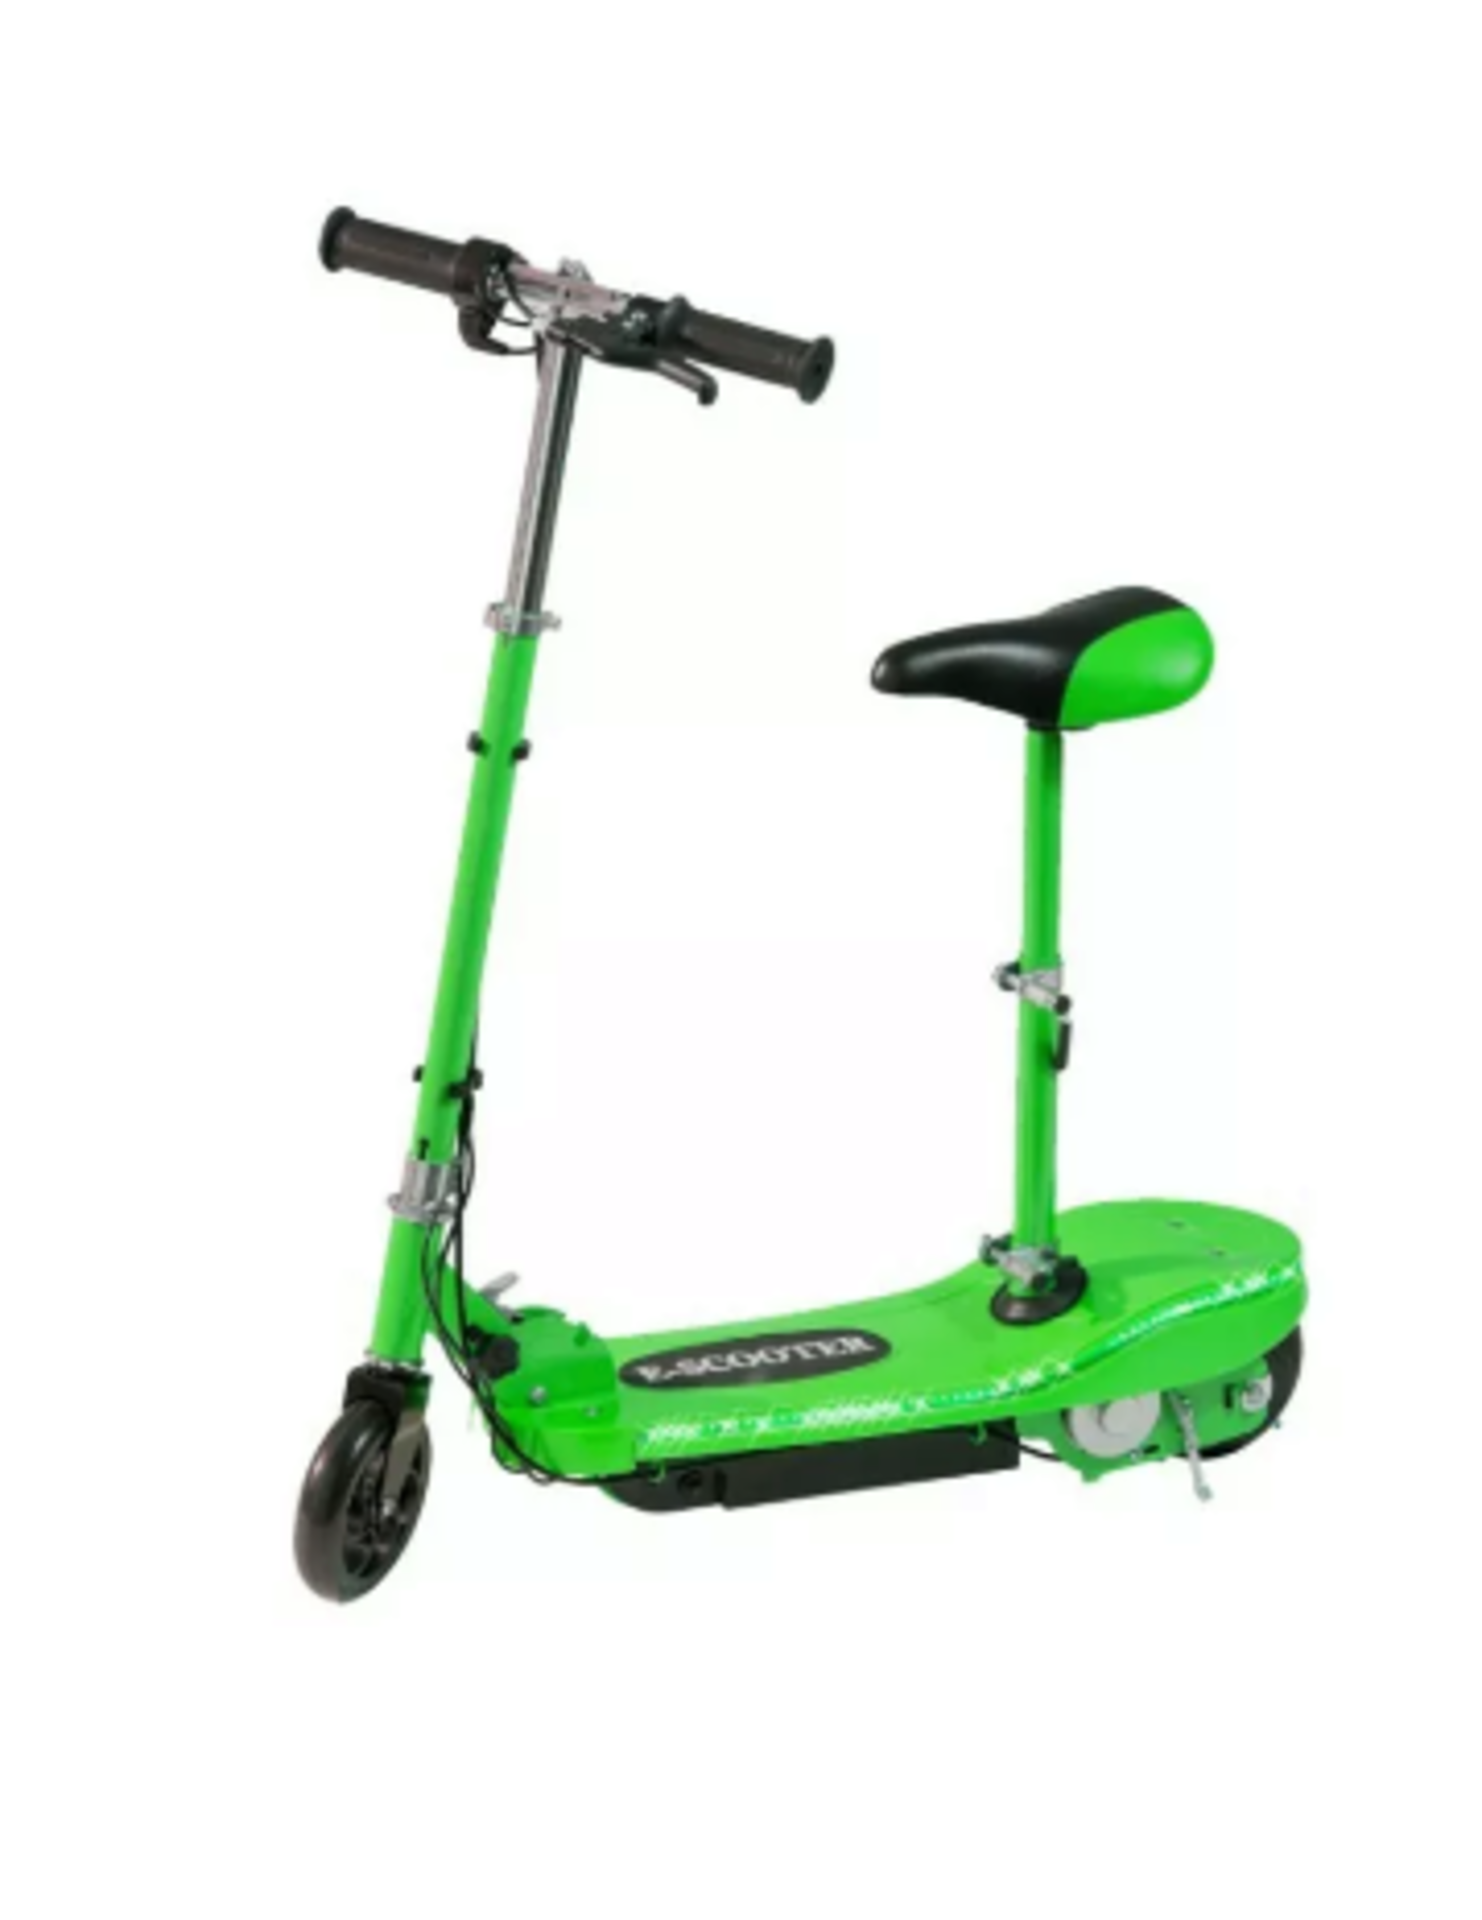 Eskoot Electric Scooter With Led Lights Brand New In Green